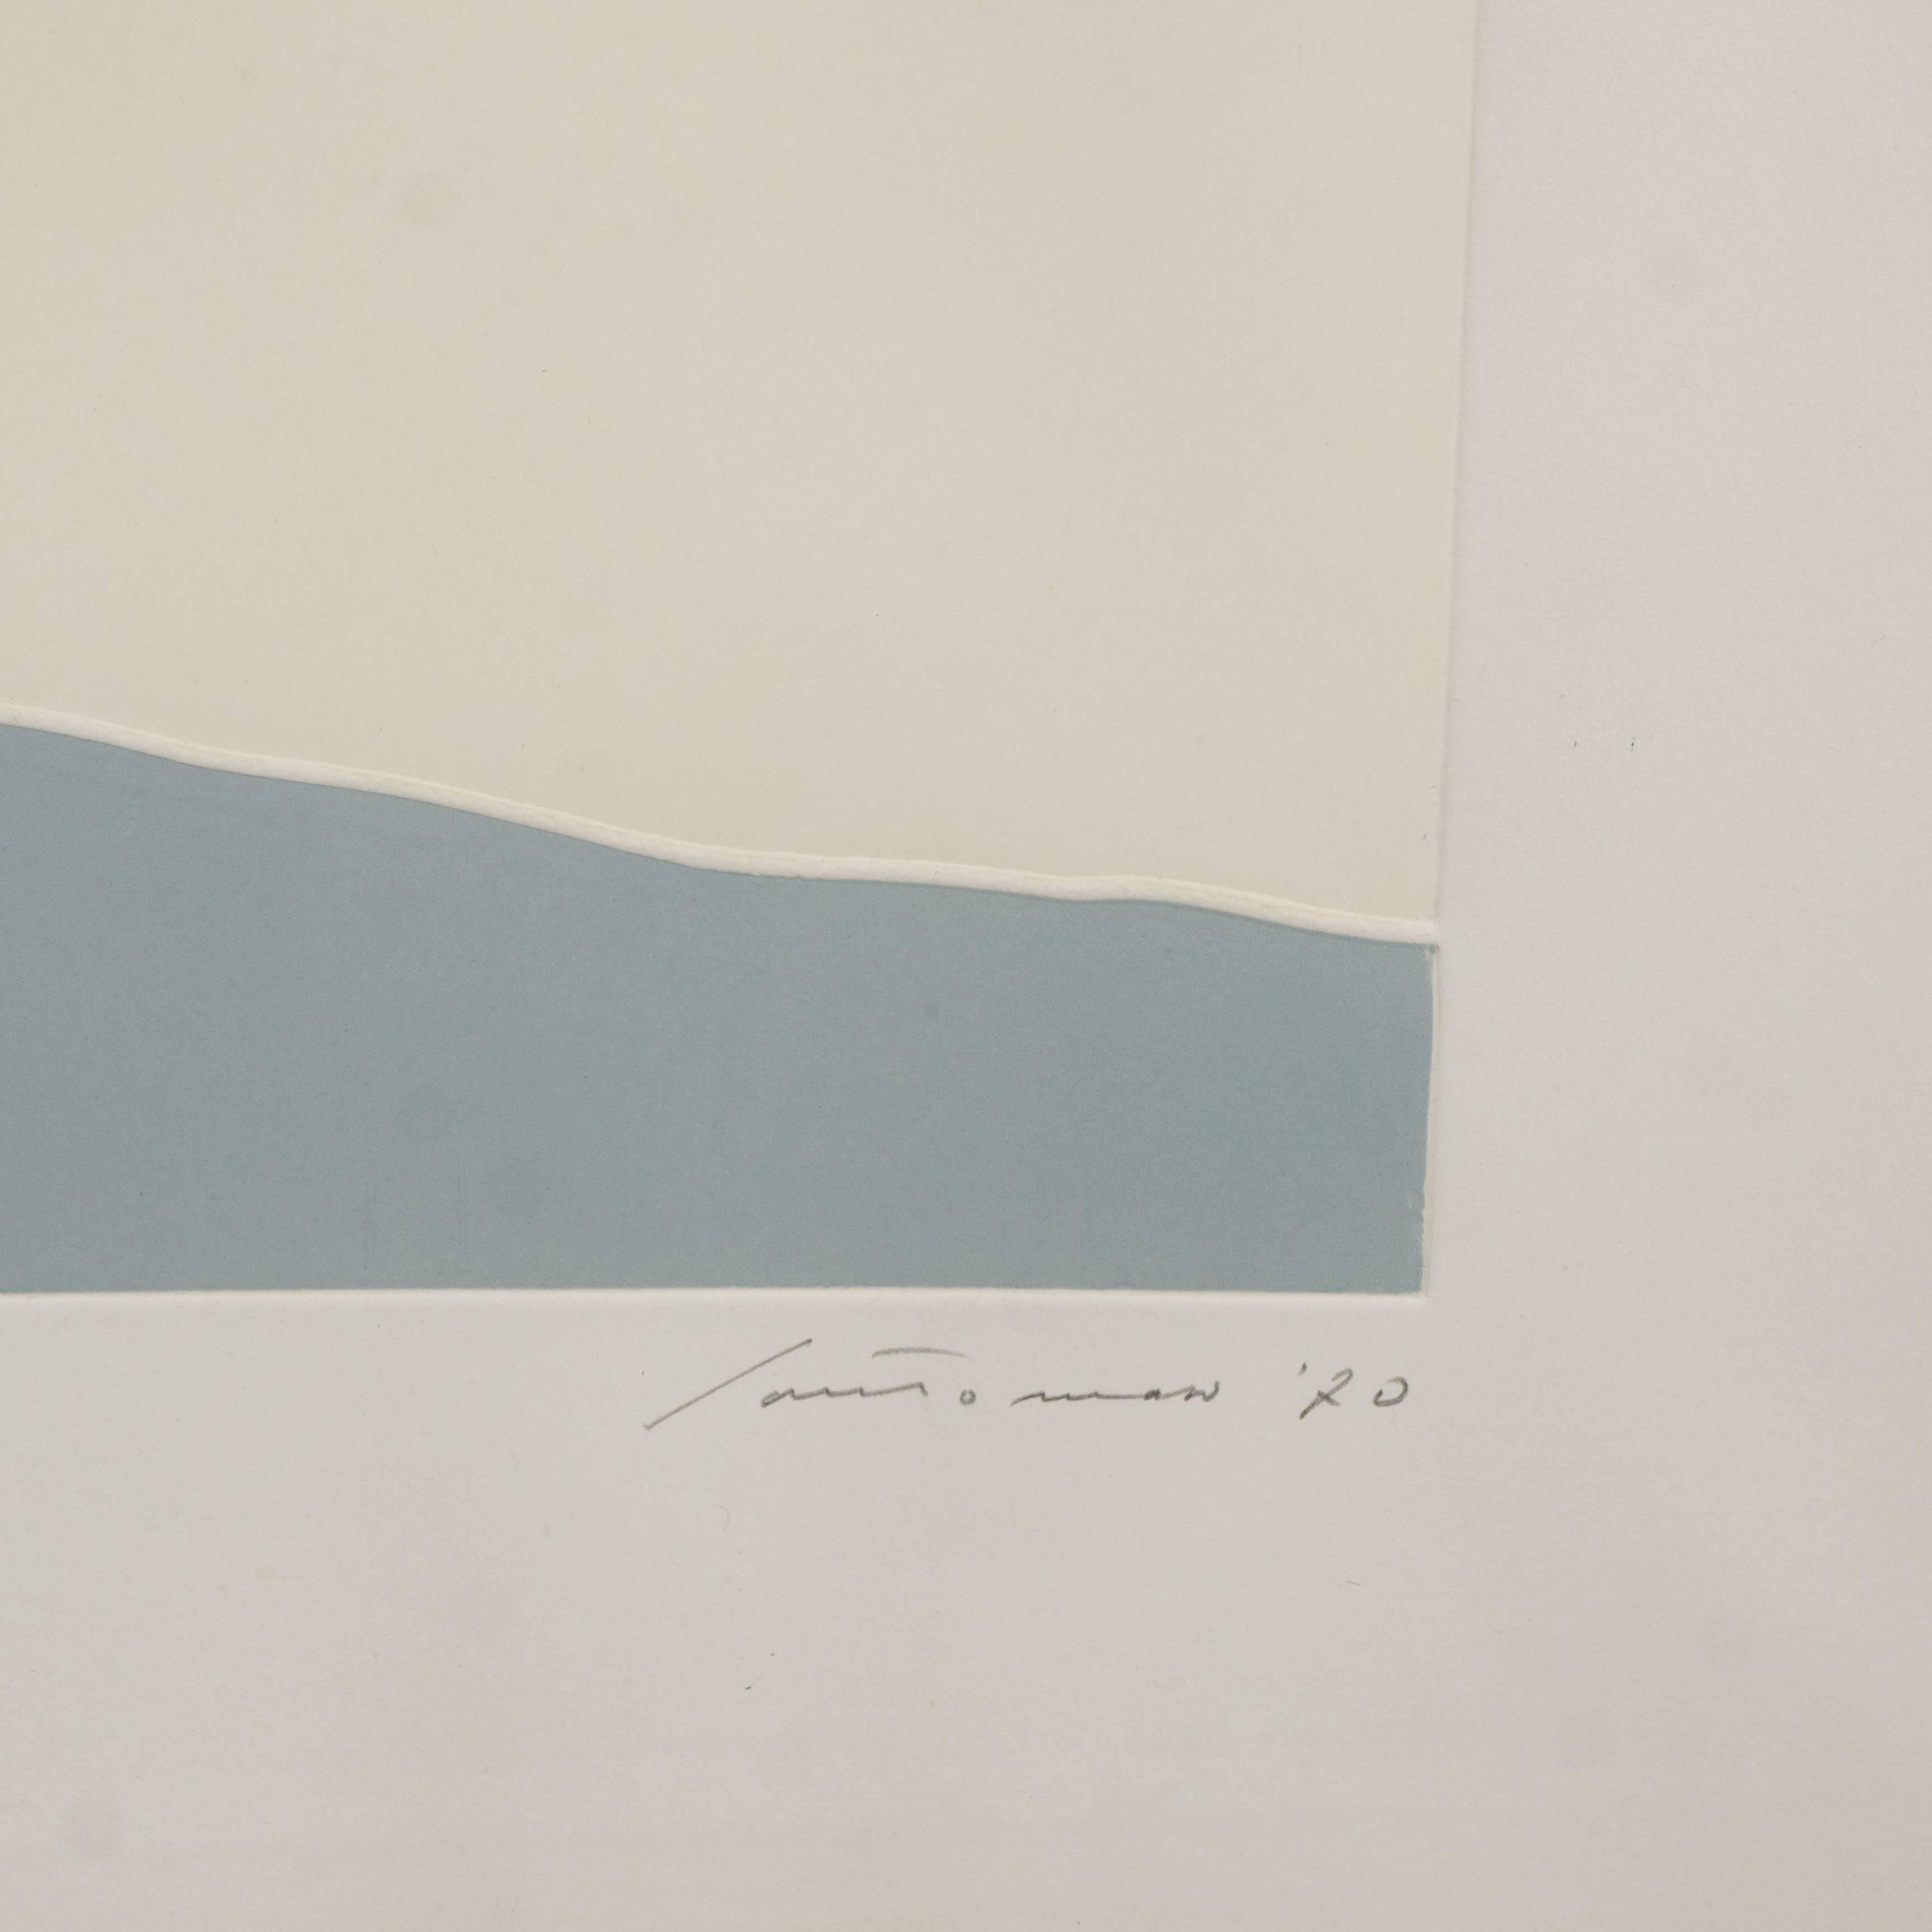 Modern minimalist print by an unknown artist, untitled, dated 1970.
Printed with two color fields, one, a diagonal of deep, navy blue and the other, a dove grey horizontal tapering bar or band. In a wood frame, partially painted in grey.